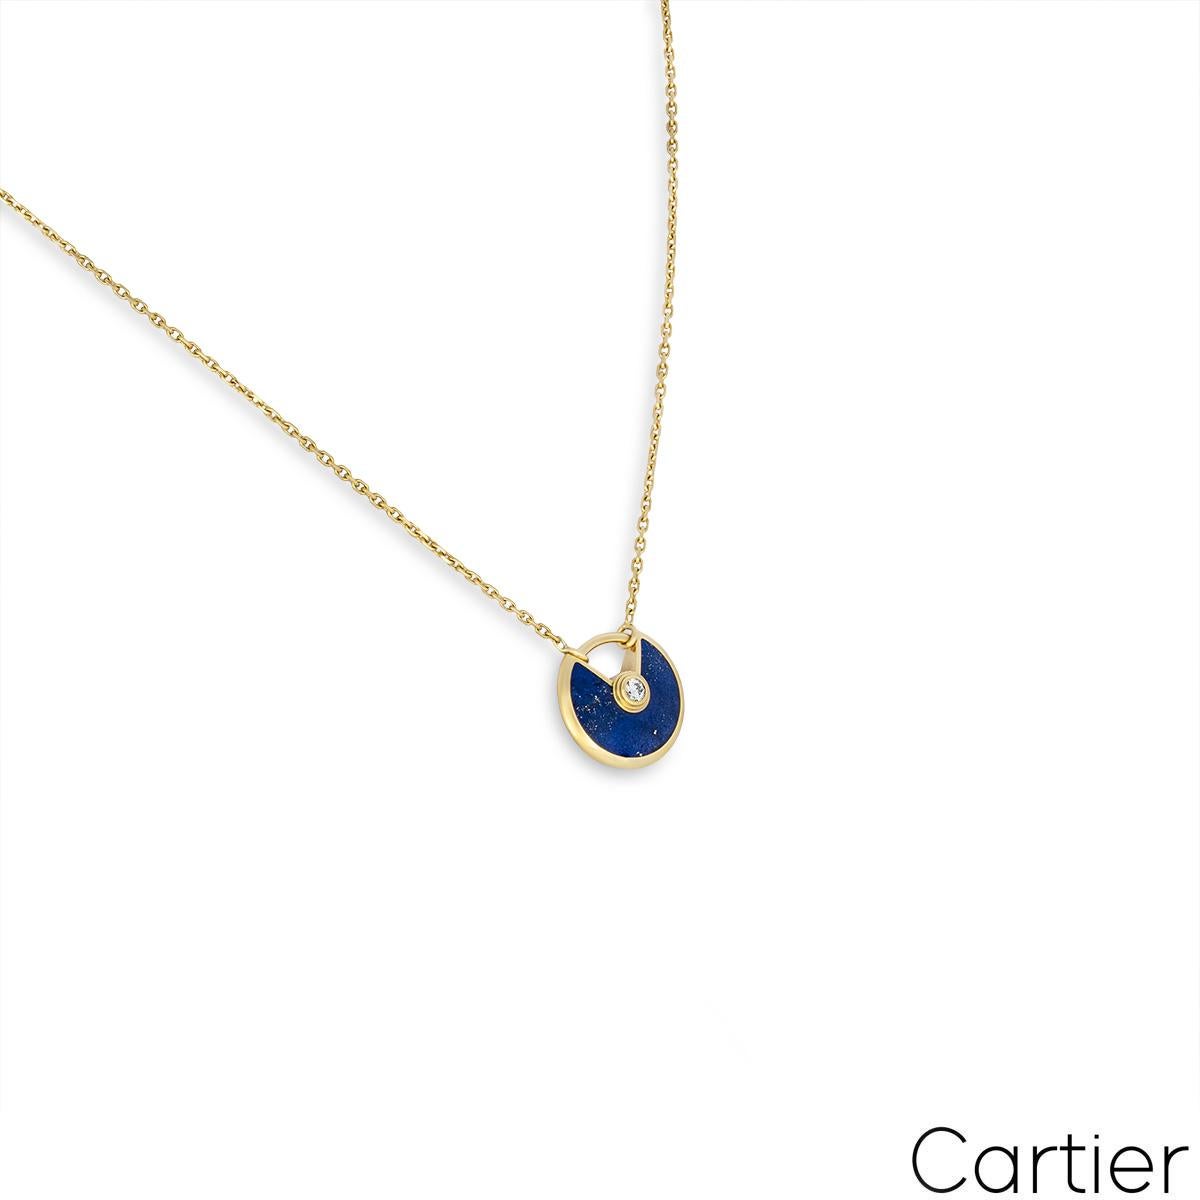 A charming 18k yellow gold lapis and diamond necklace by Cartier from the Amulette de Cartier collection. The XS pendant comprises of a circular talisman set with lapis and complemented by a single round brilliant cut diamonds weighing approximately